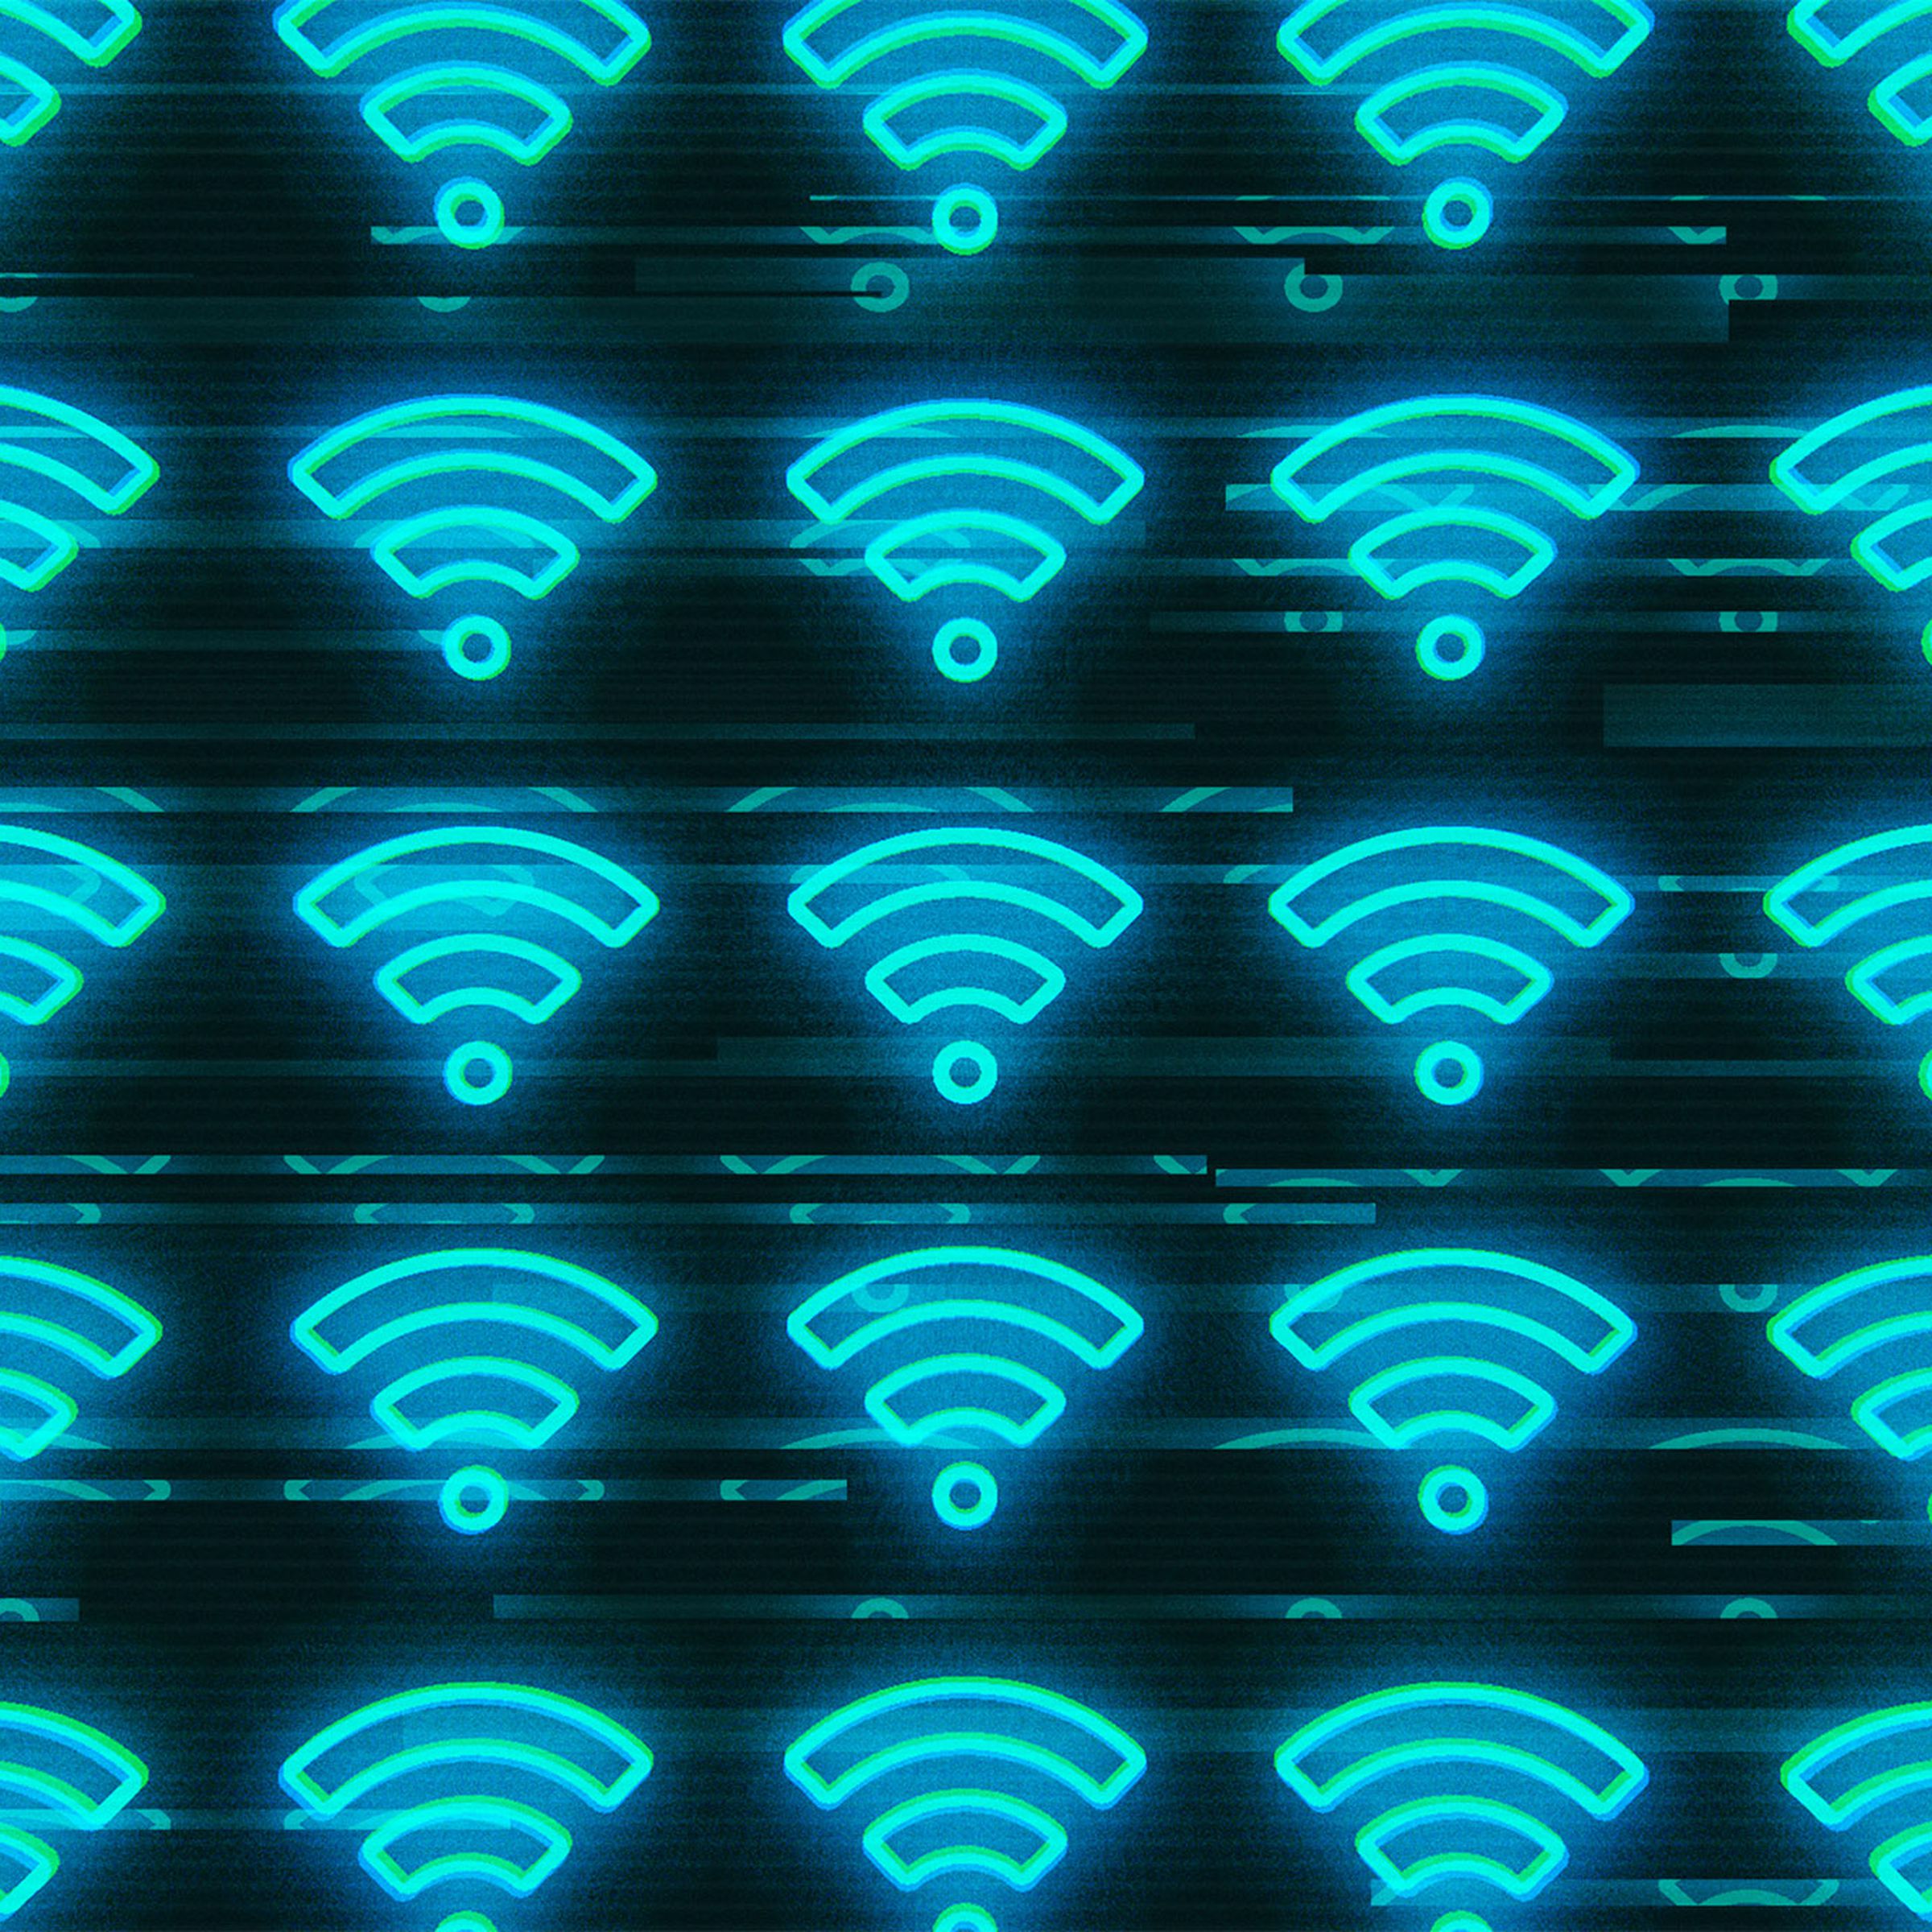 An illustration showing a repeating pattern of blue Wi-Fi logos